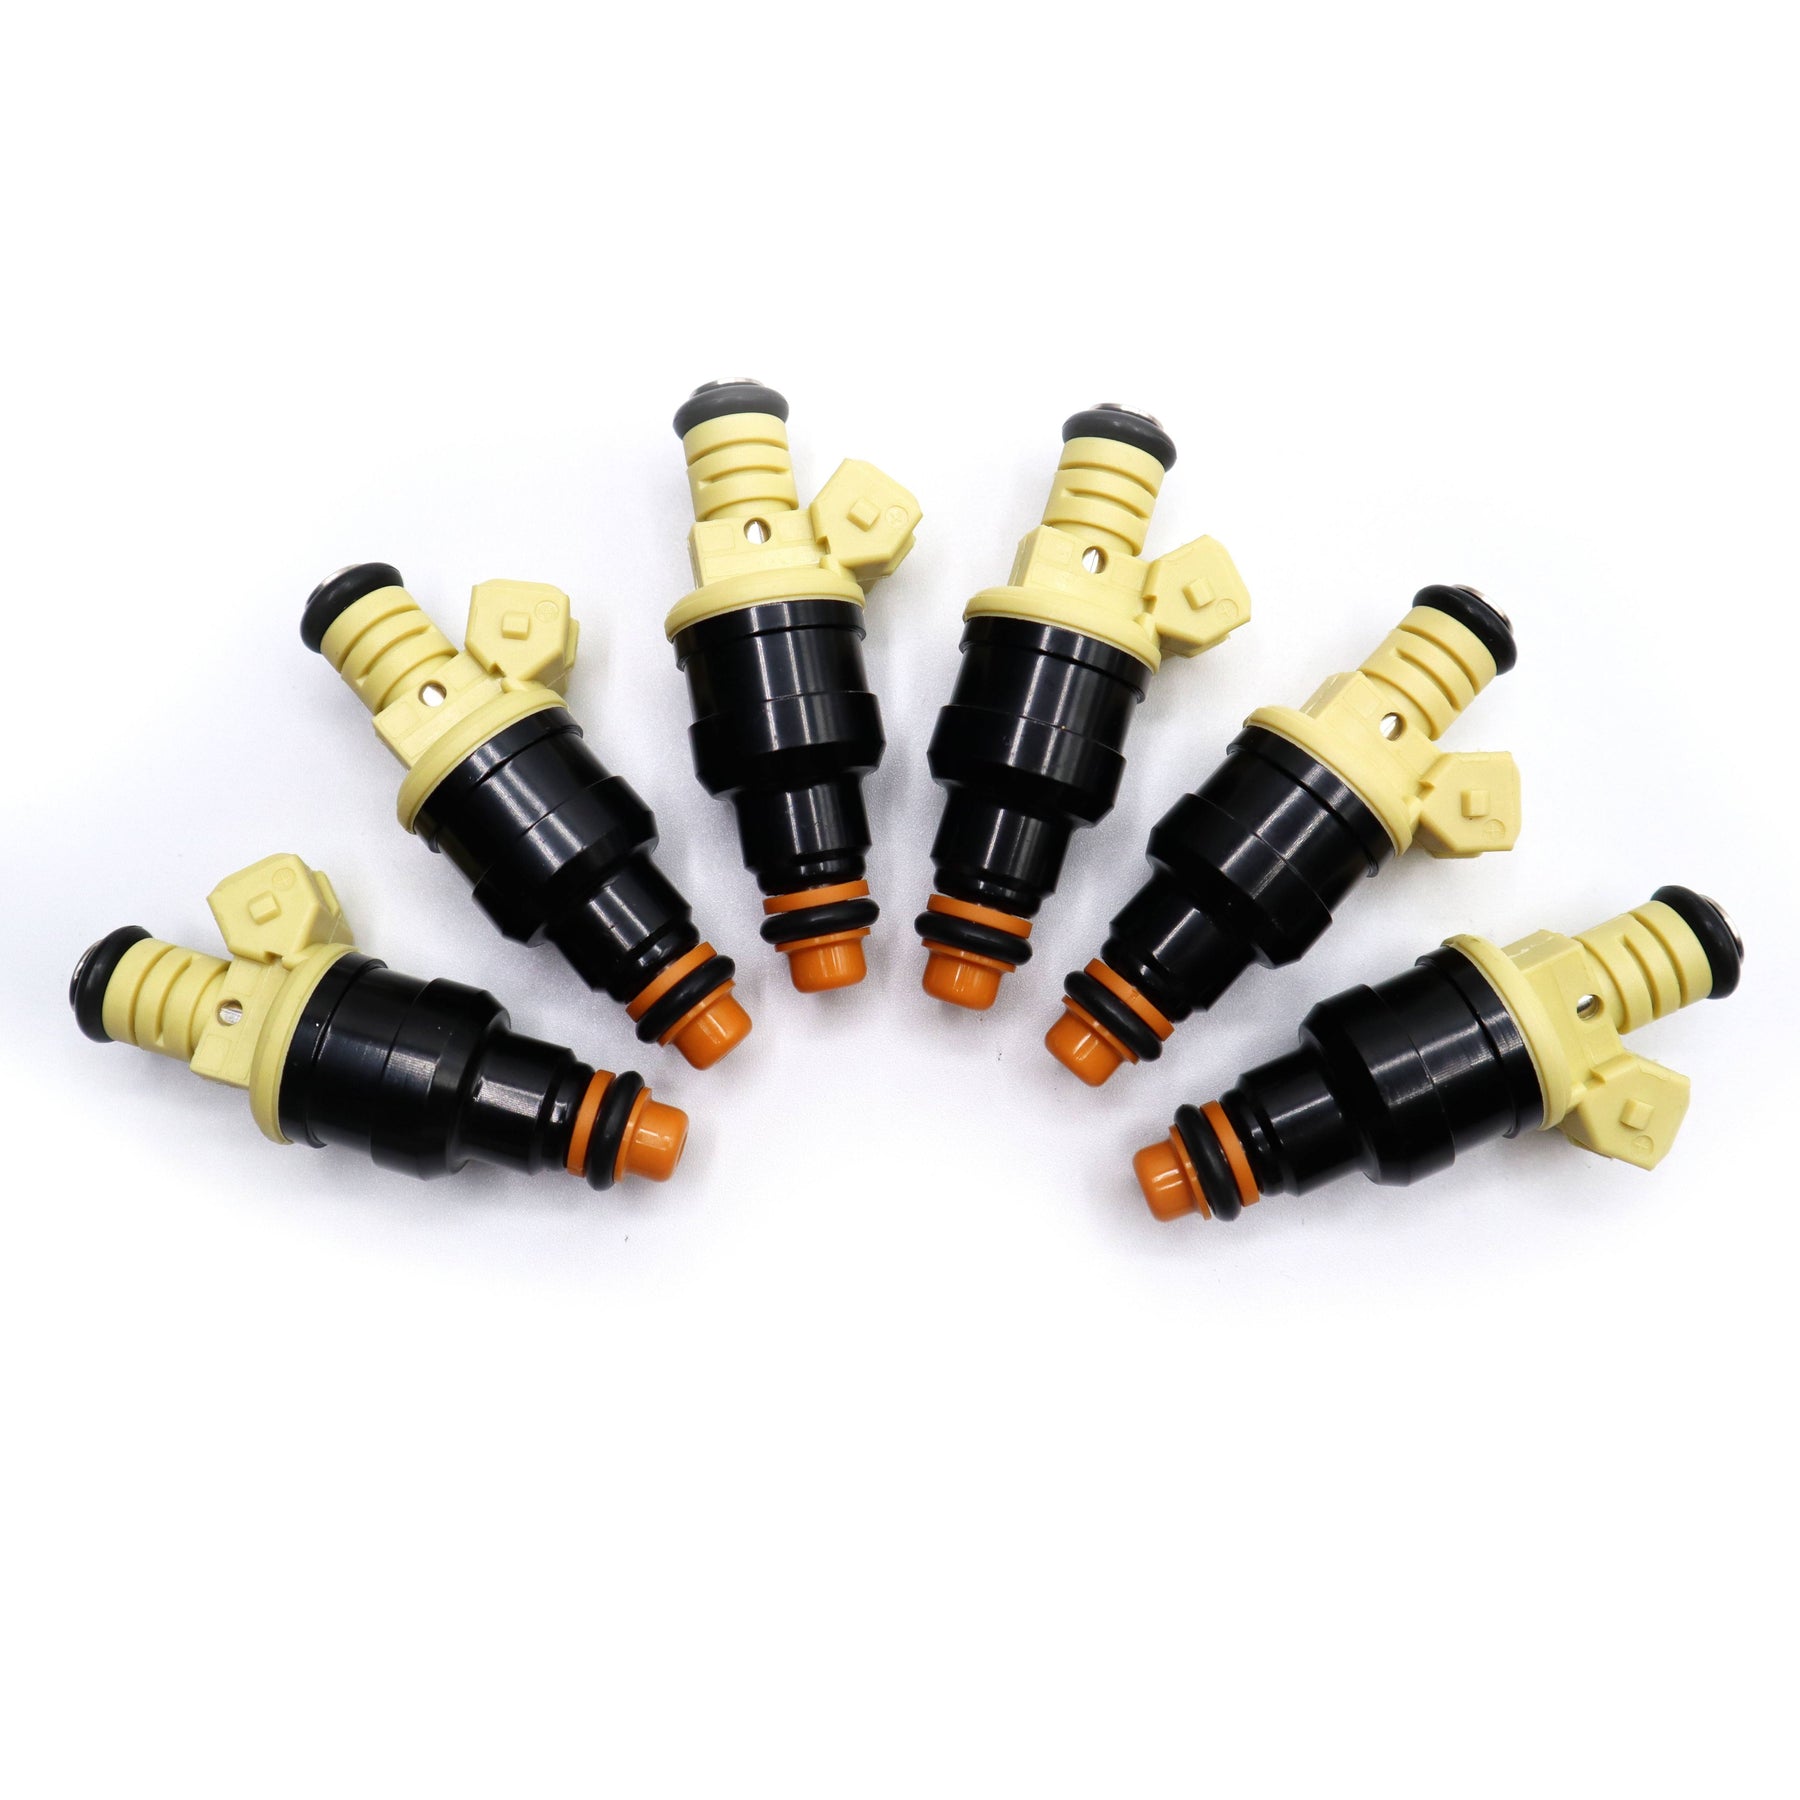 What are fuel injectors and why you should consider upgrading them?